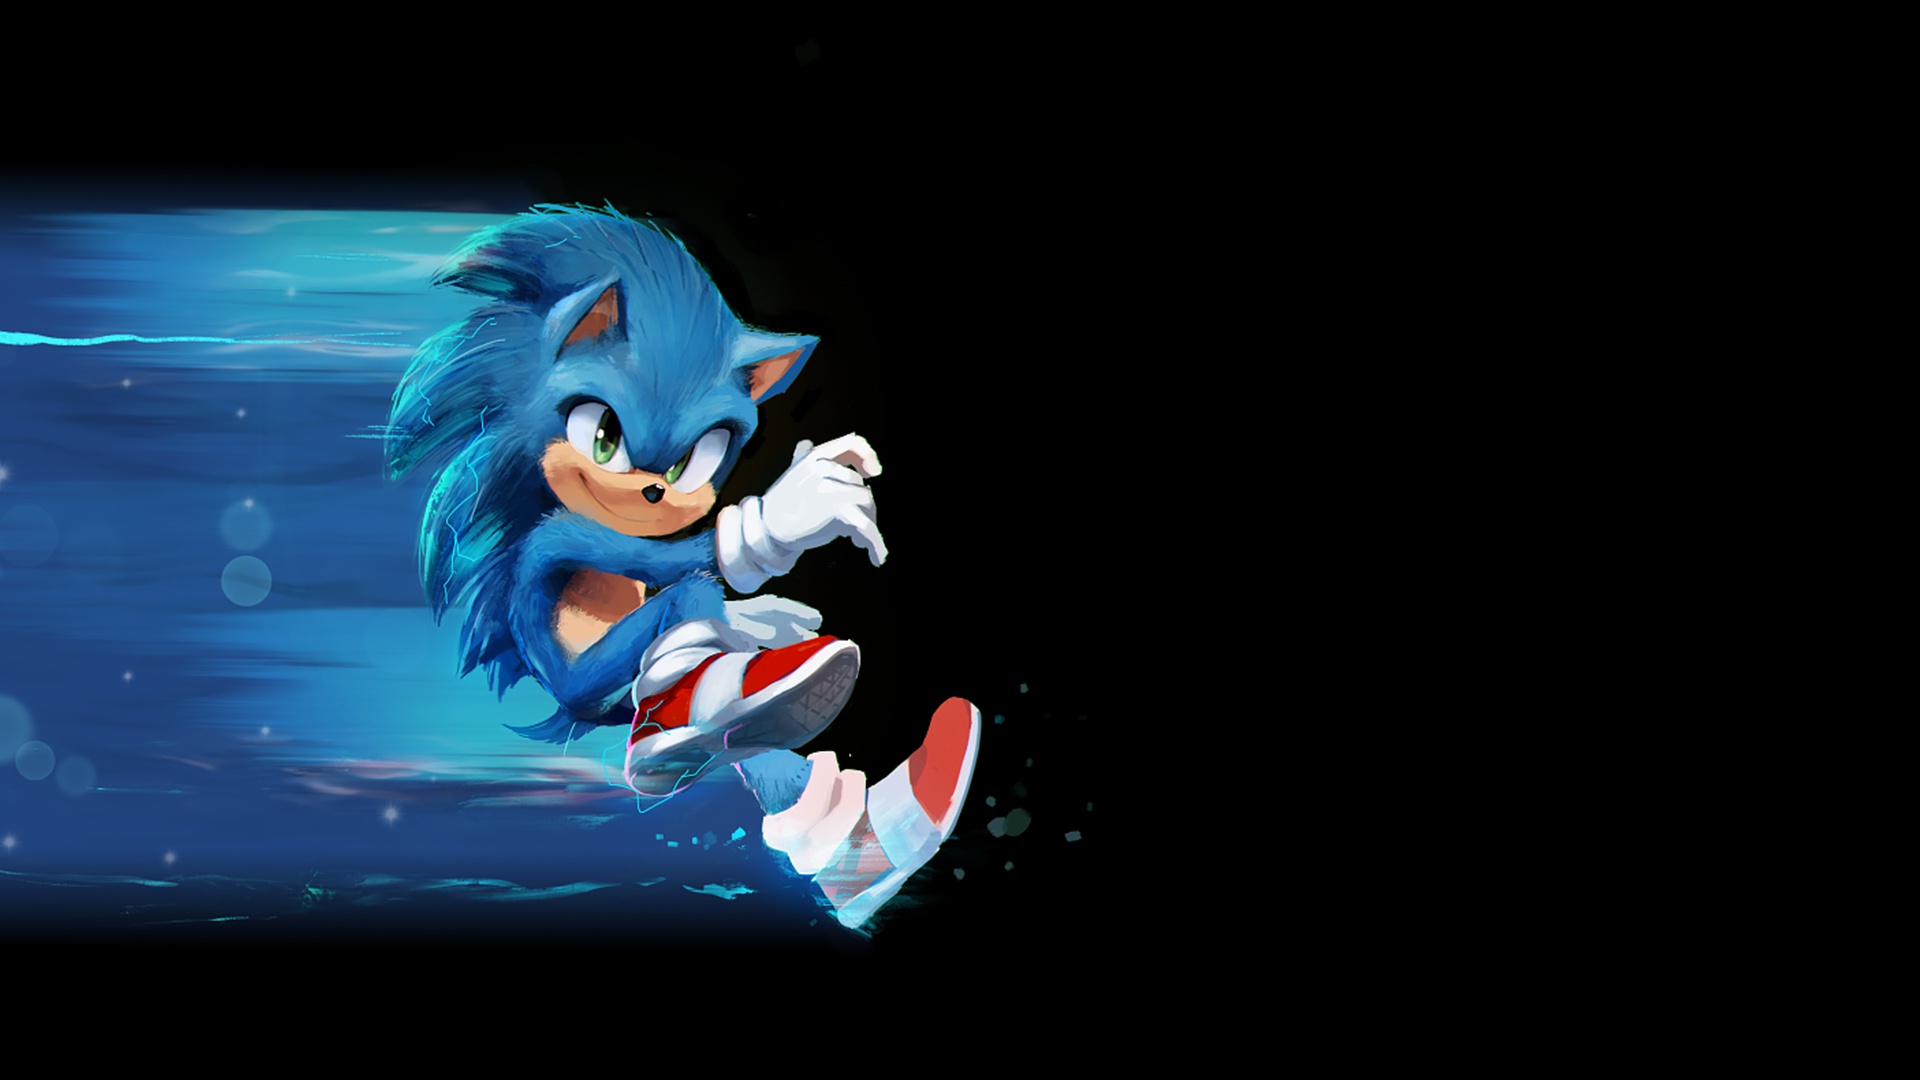 Sonic The Hedgehog Video Game HD Backgrounds Wallpapers 52428.